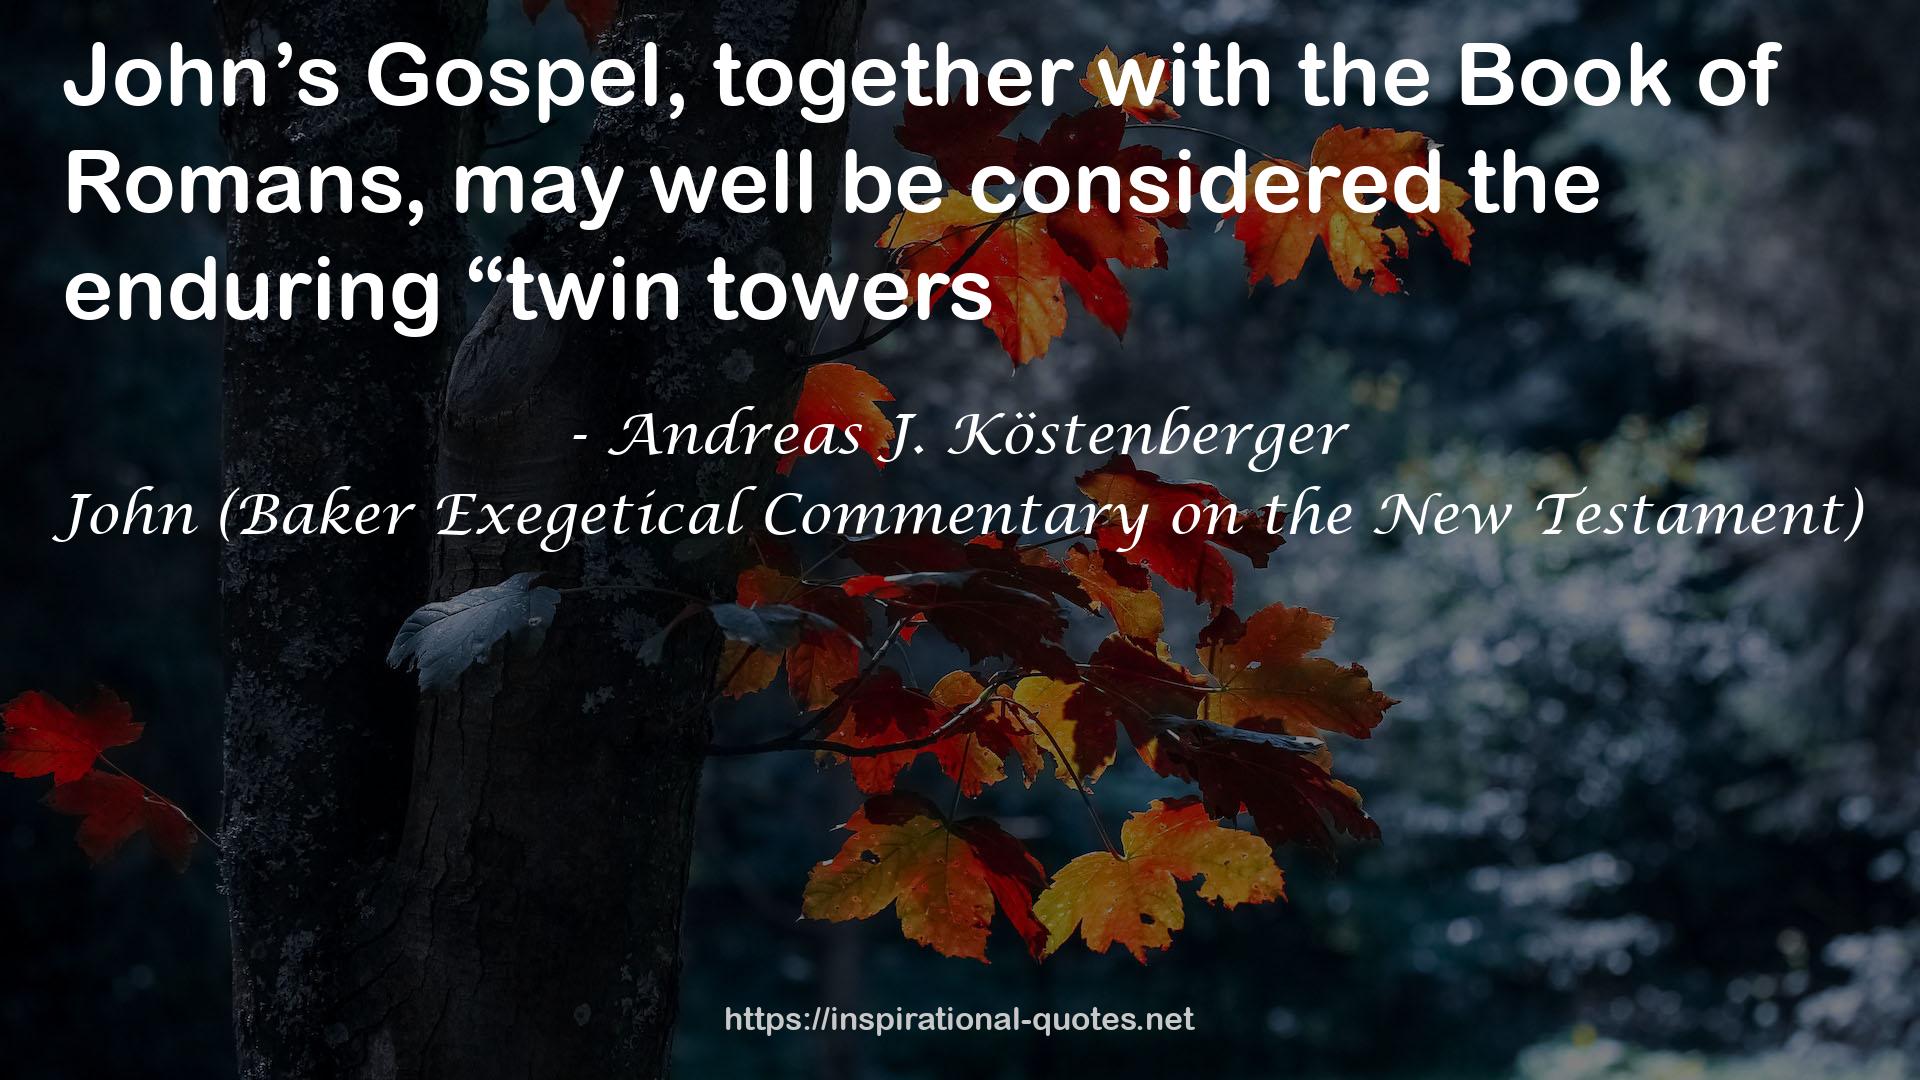 John (Baker Exegetical Commentary on the New Testament) QUOTES